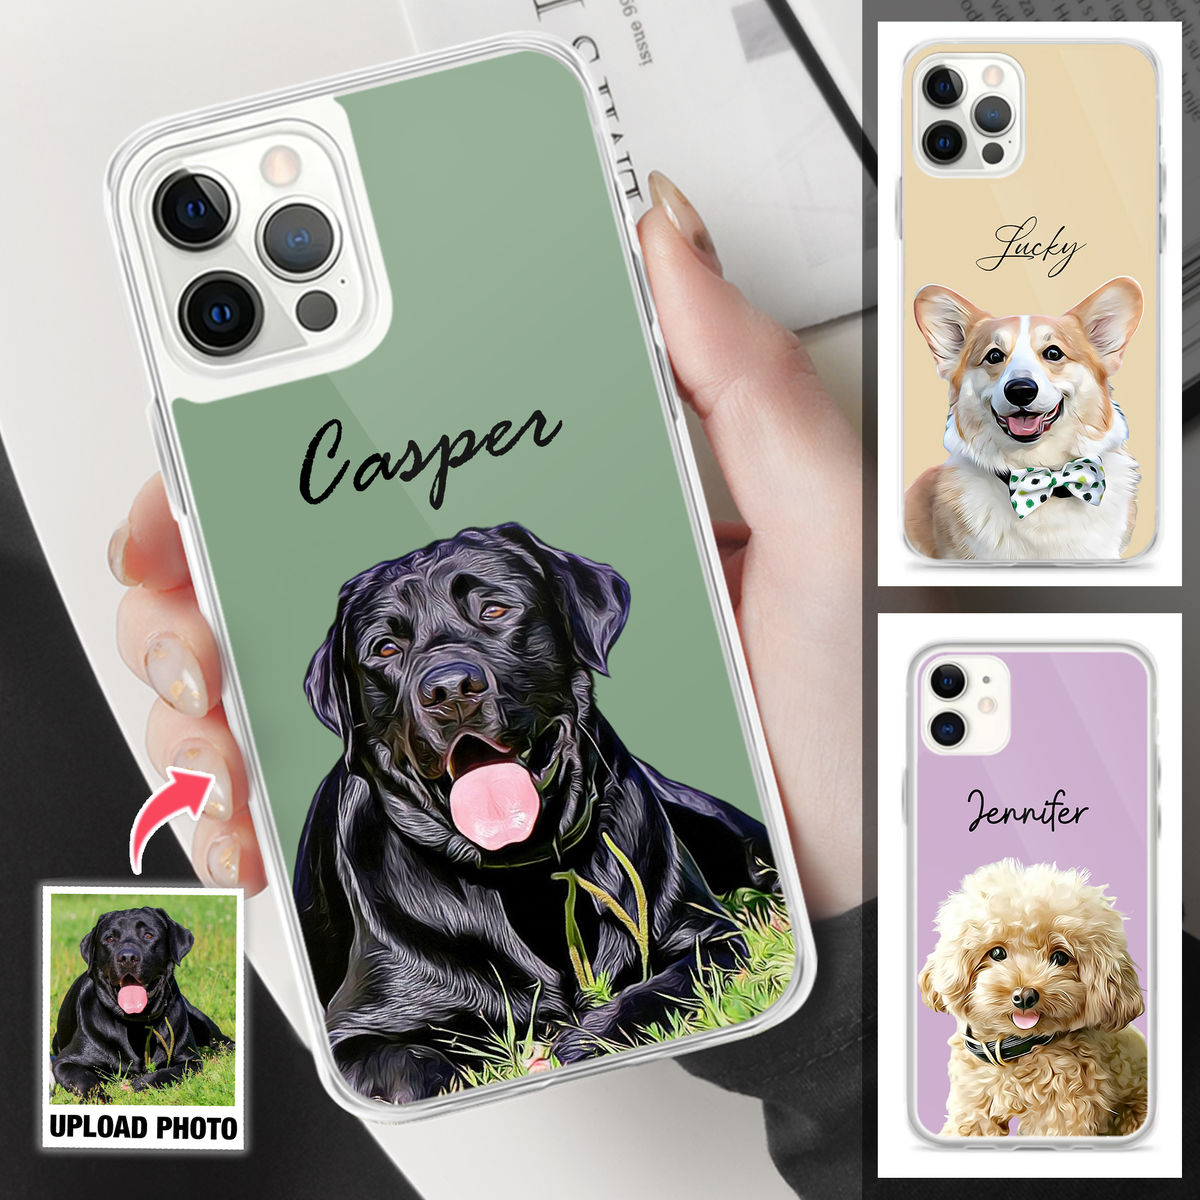 Custom Phone Case From Photo - iPhone Case - Pet Lover Gifts - Dog Portrait - Digital Oil Painting - Christmas Gifts, Custom Photo Gifts